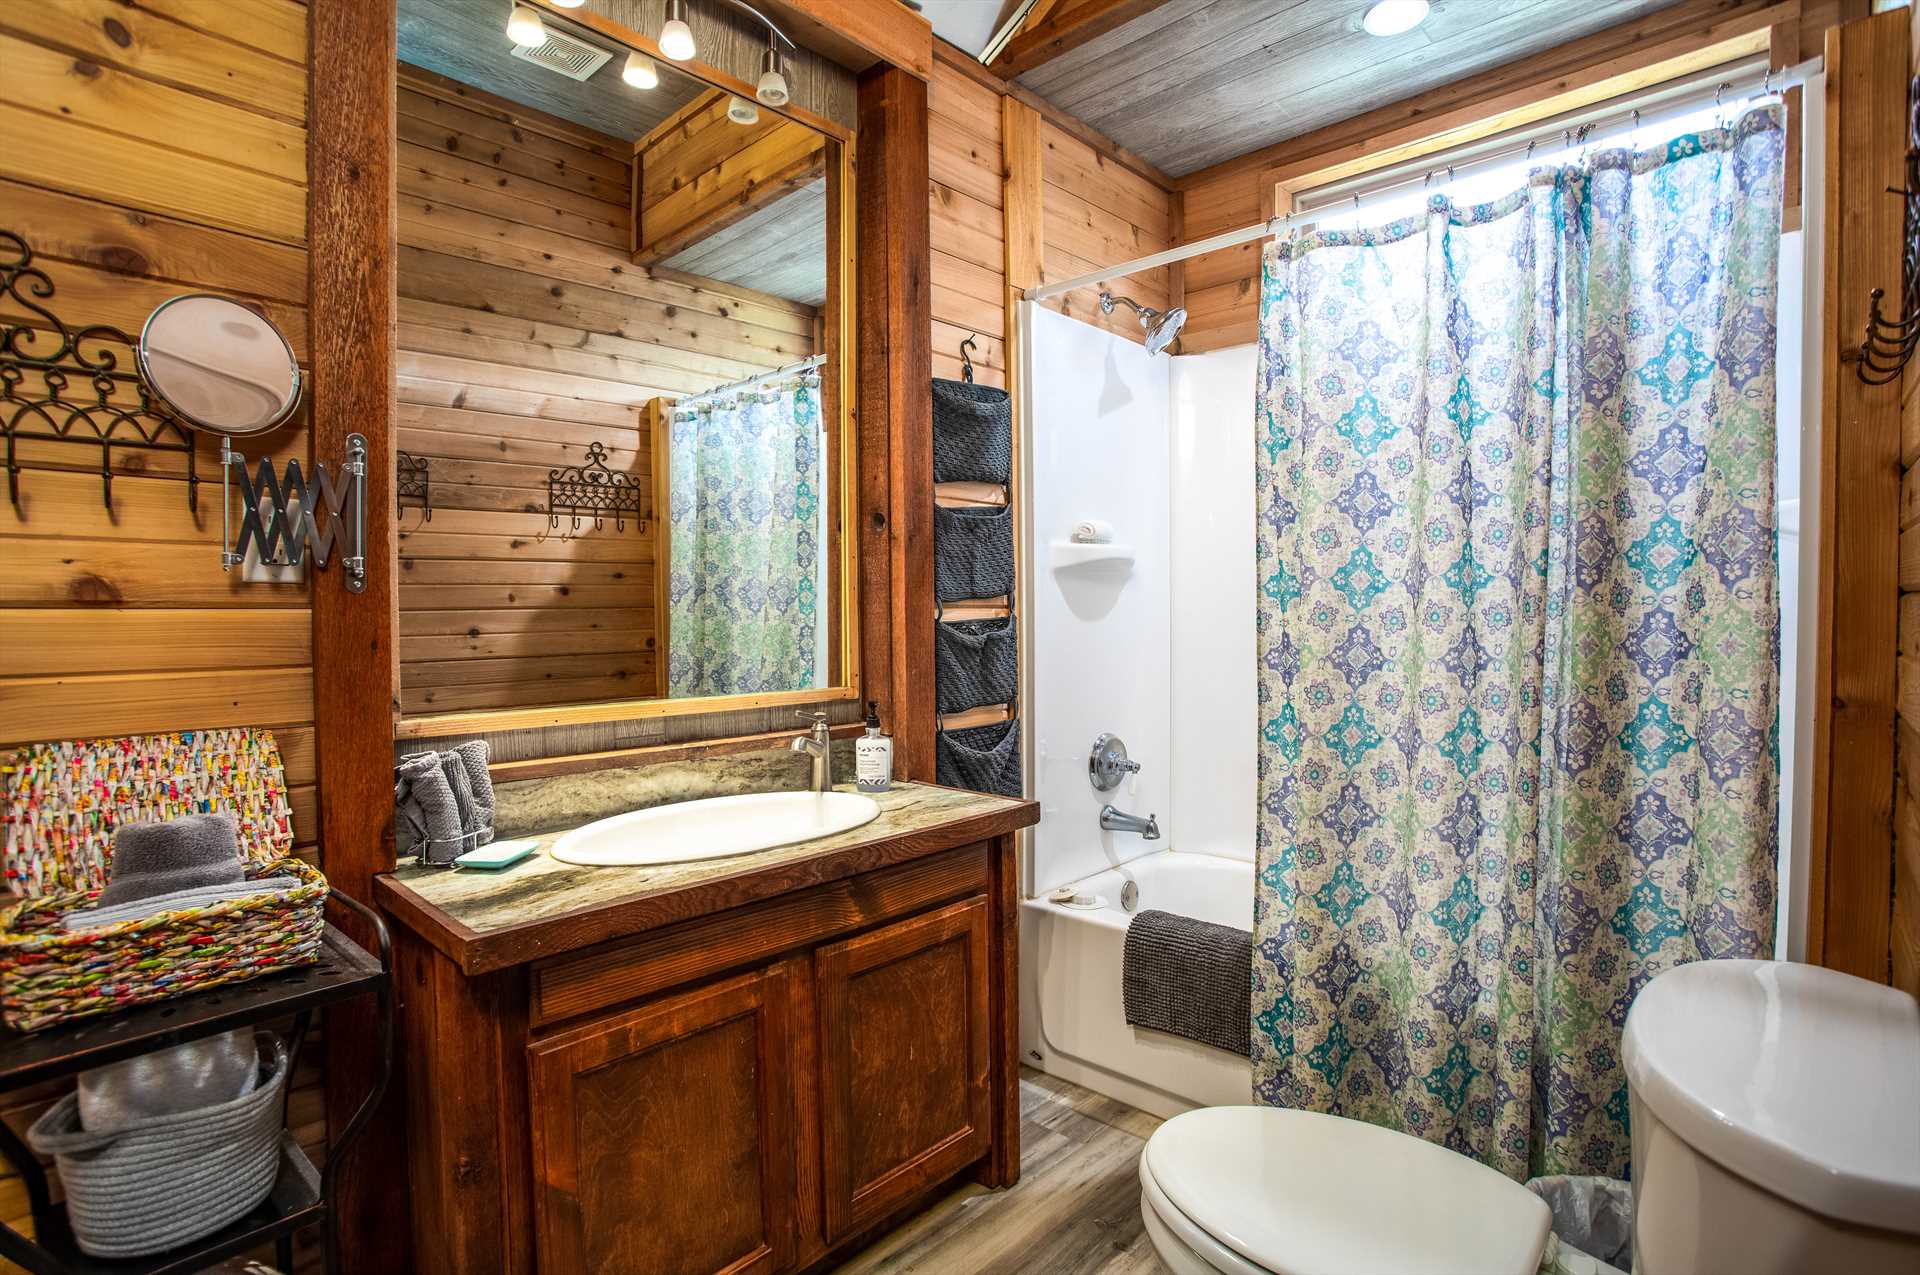                                                 For cleanup convenience, the Hideaway has a utility room with a washer and dryer combo.